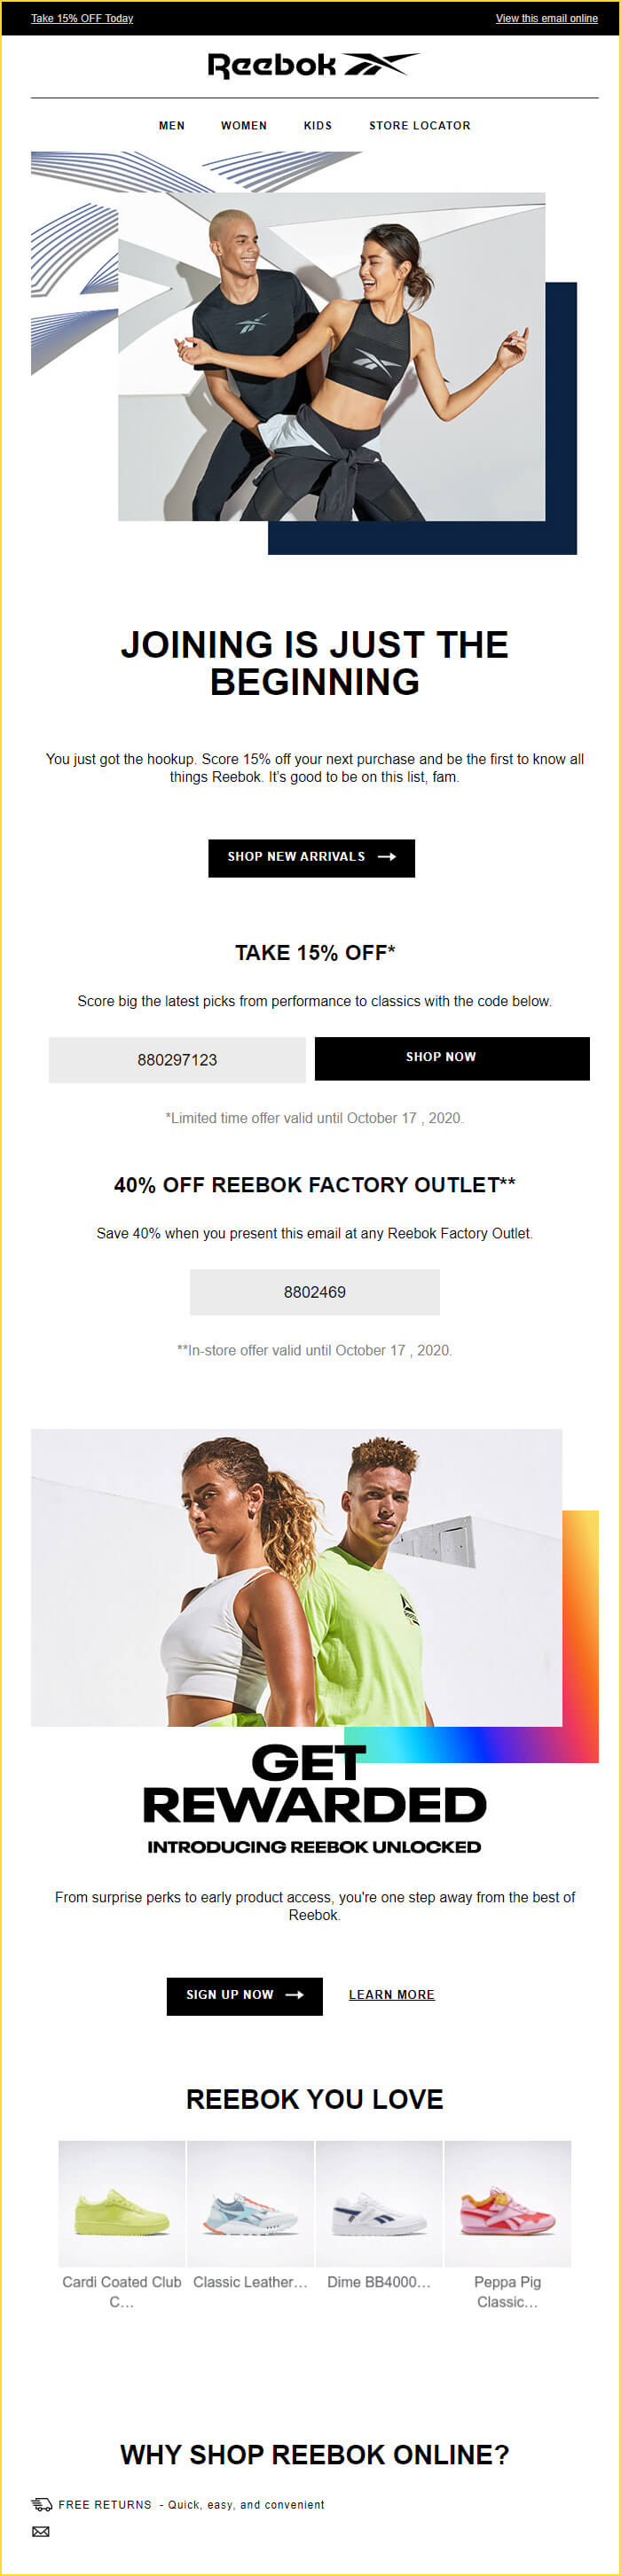 Reebok welcome email 1